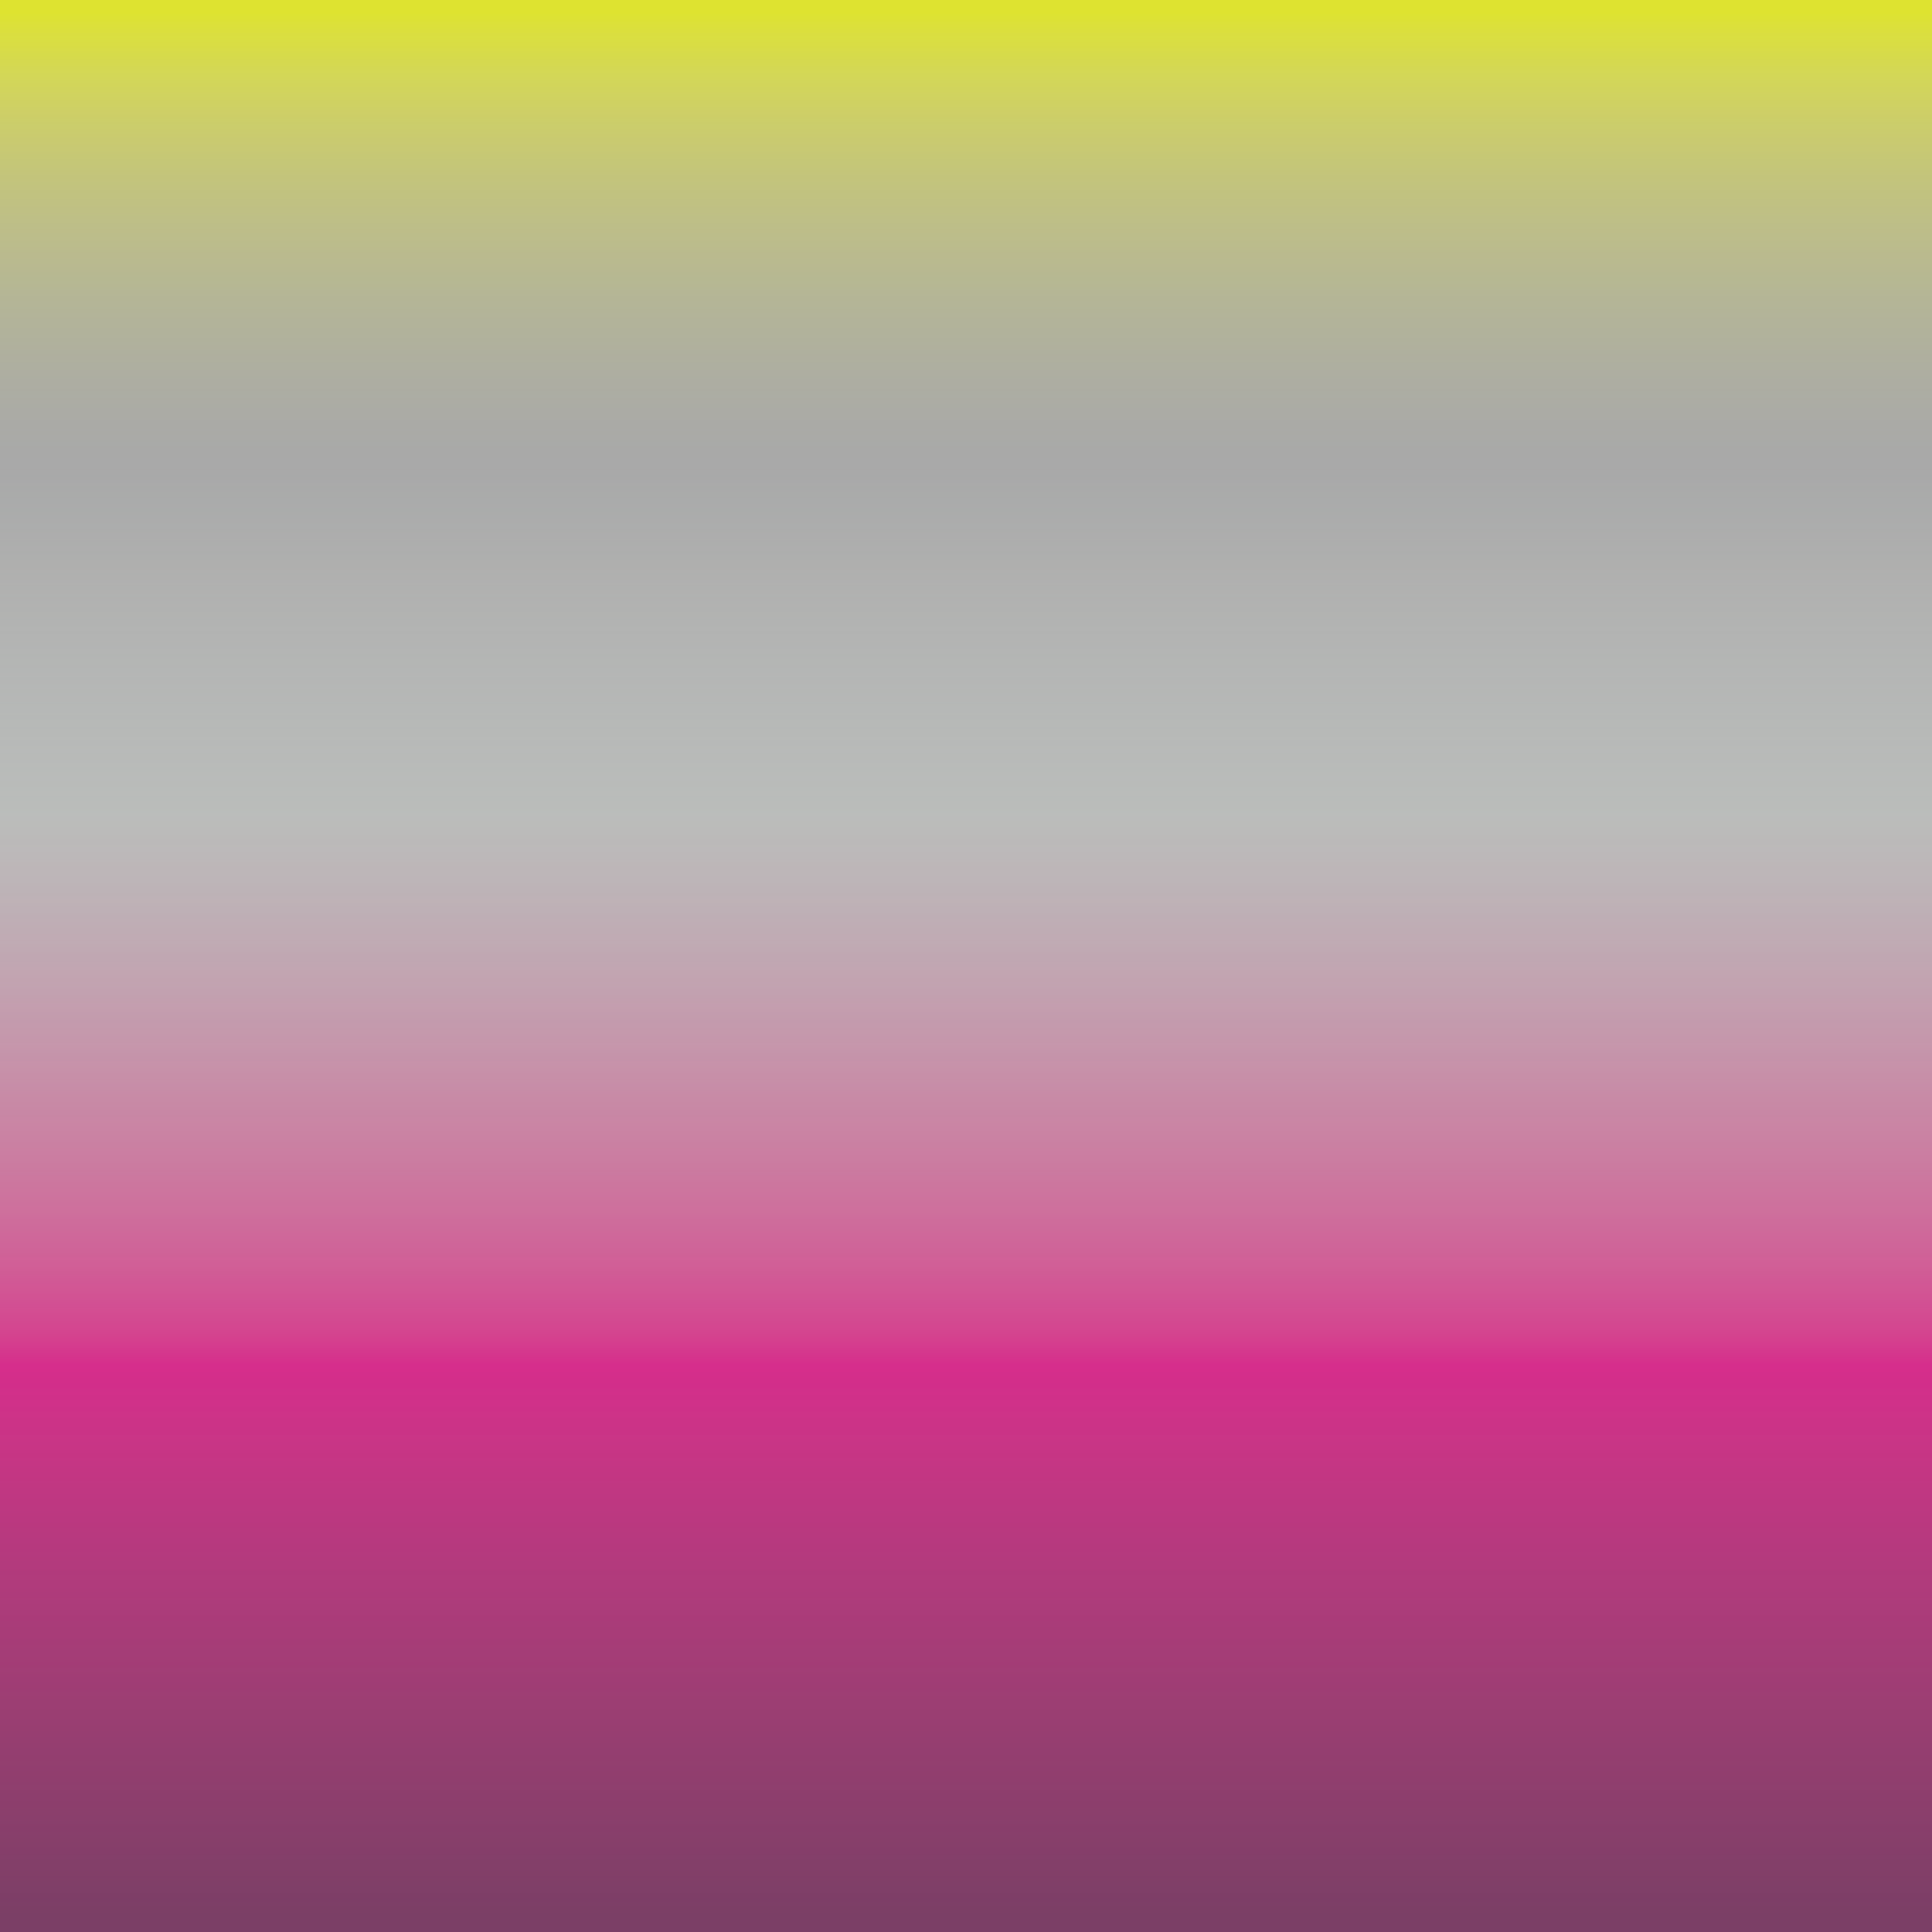 062320-19_Blur_Ombre_TerralonSmooth_062319-19-12 Neon.png